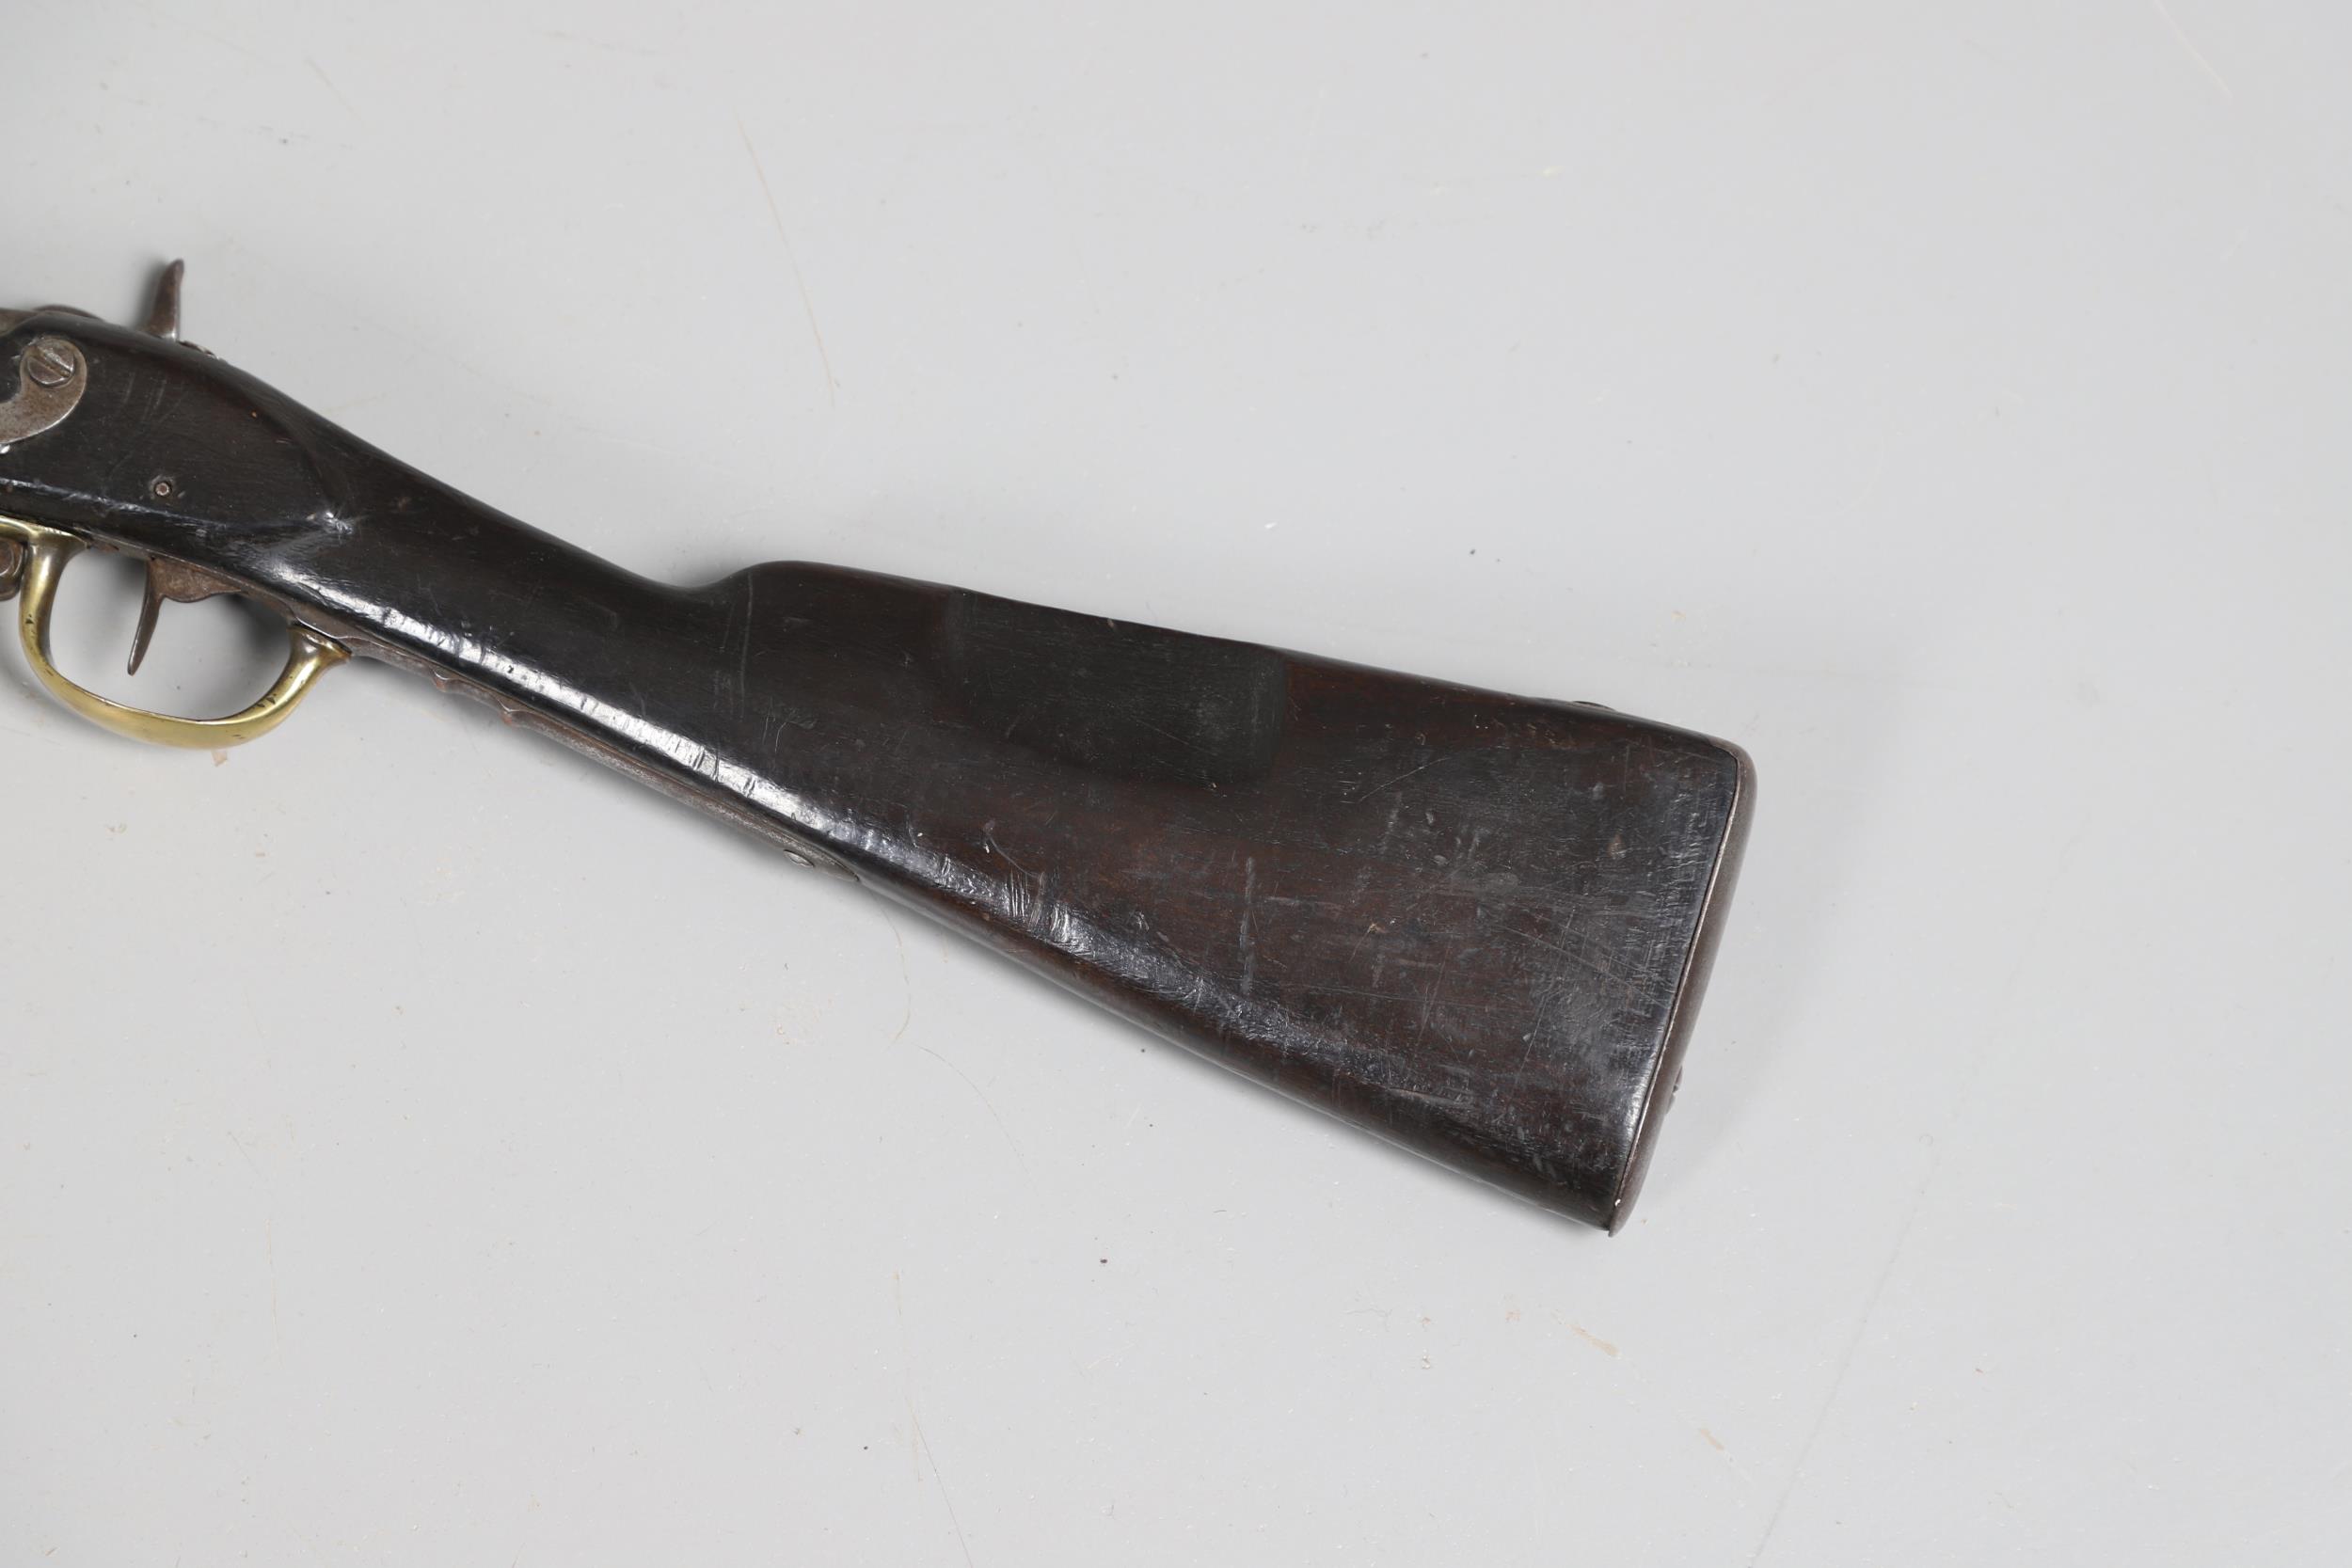 AN UNUSUAL MID 19TH CENTURY BAVARIAN ROYAL ARMY CADET'S PERCUSSION MUSKET. - Image 13 of 13